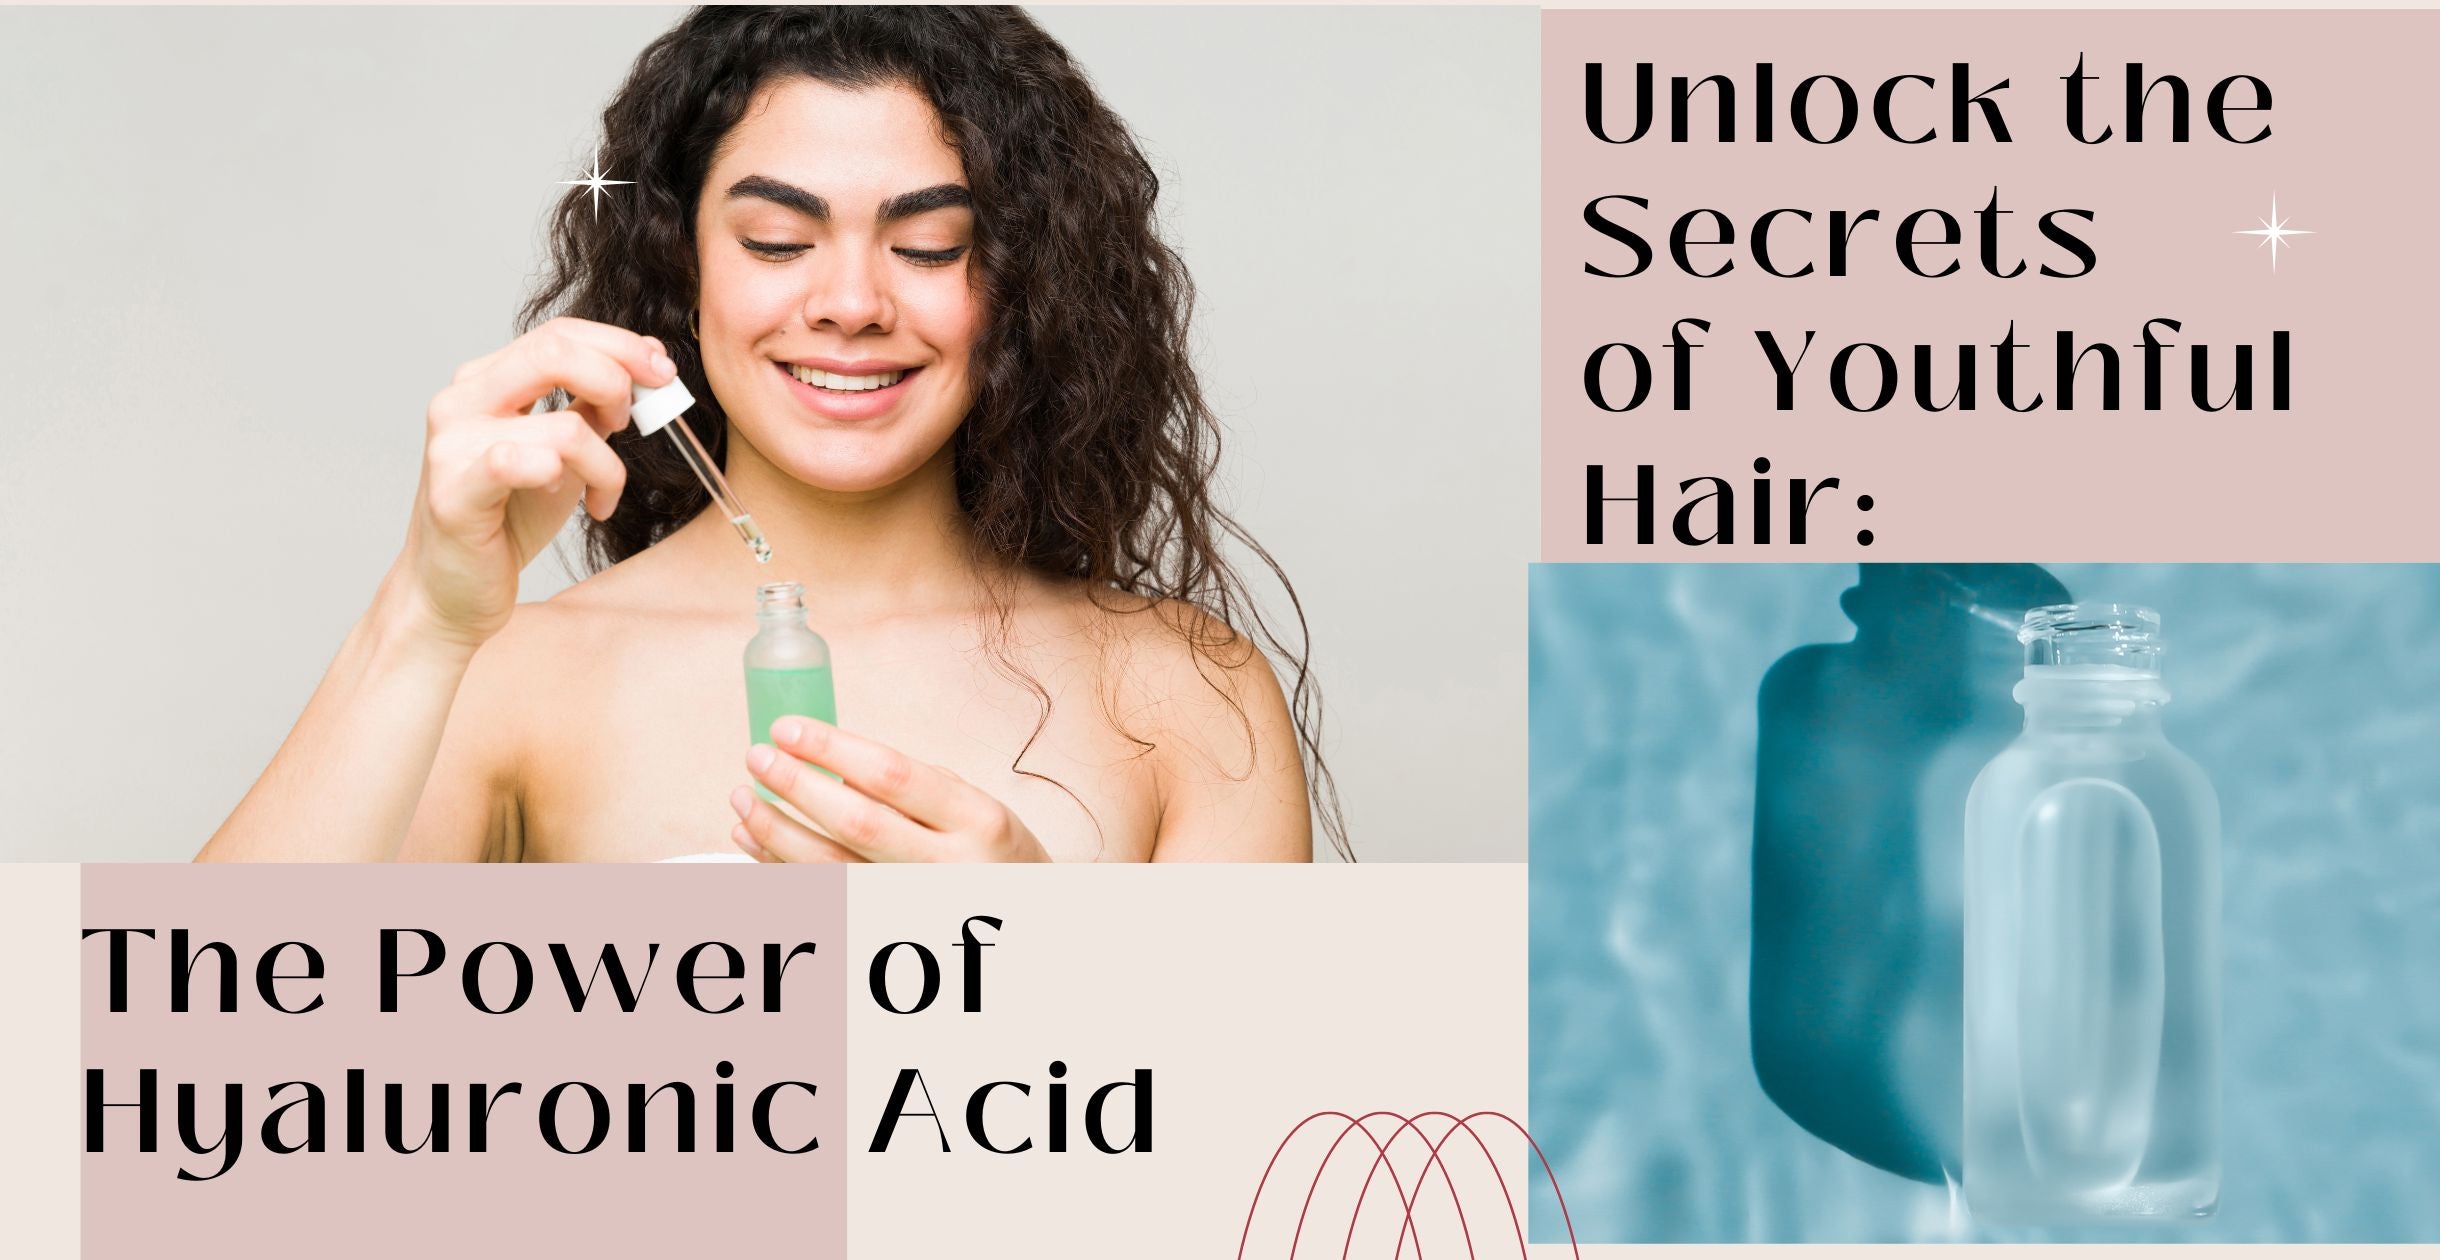 Unlock the Secrets of Youthful Hair: The Power of Hyaluronic Acid